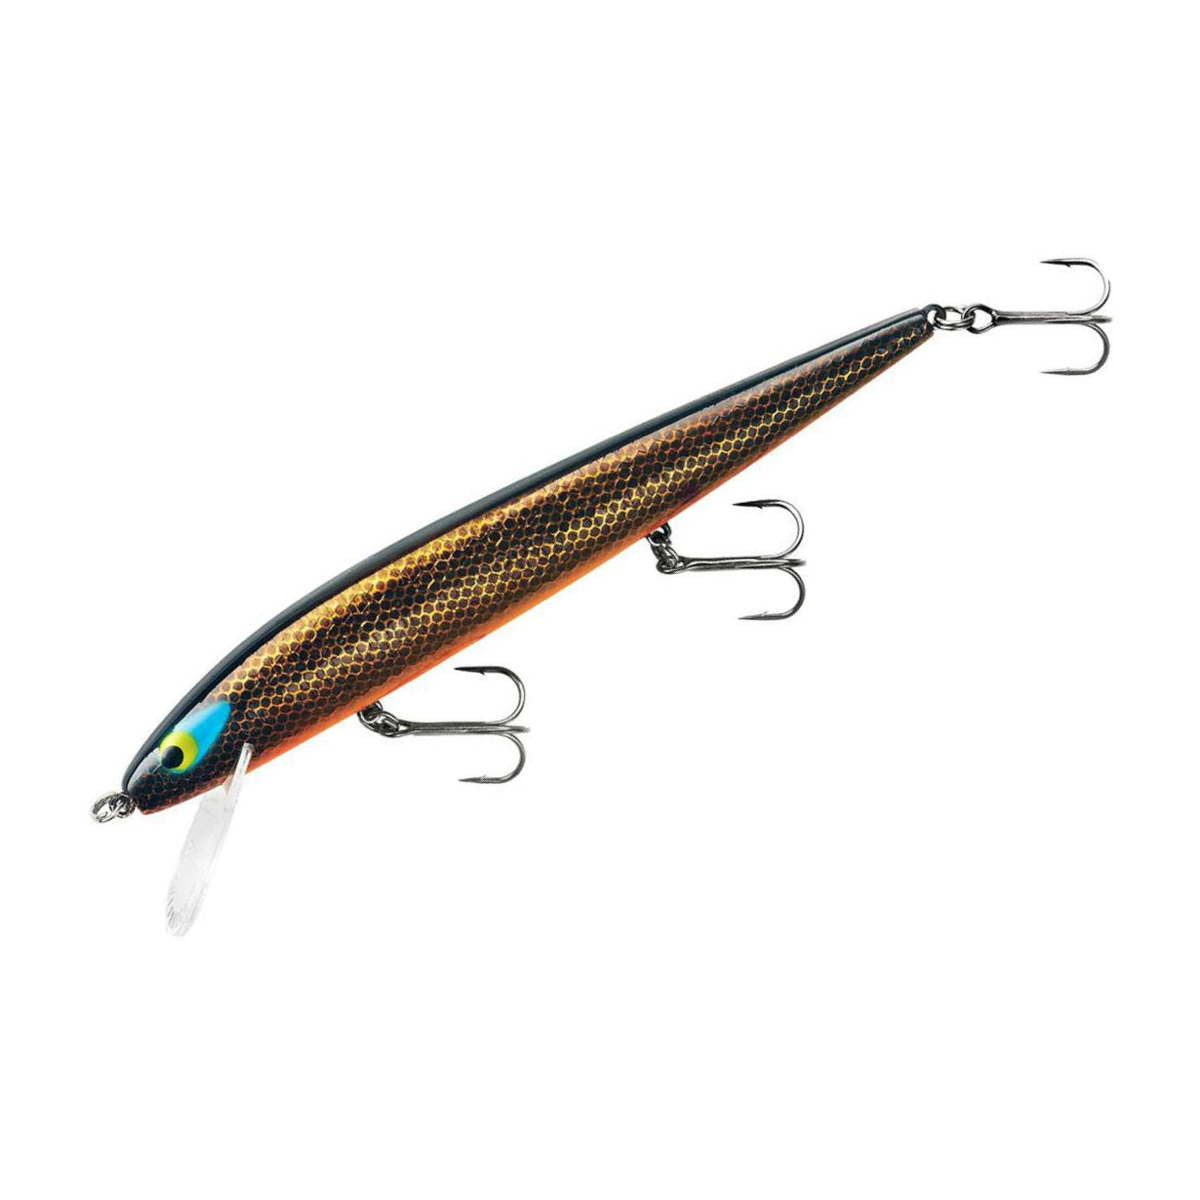 Photo of Smithwick Perfect 10 Rogue for sale at United Tackle Shops.